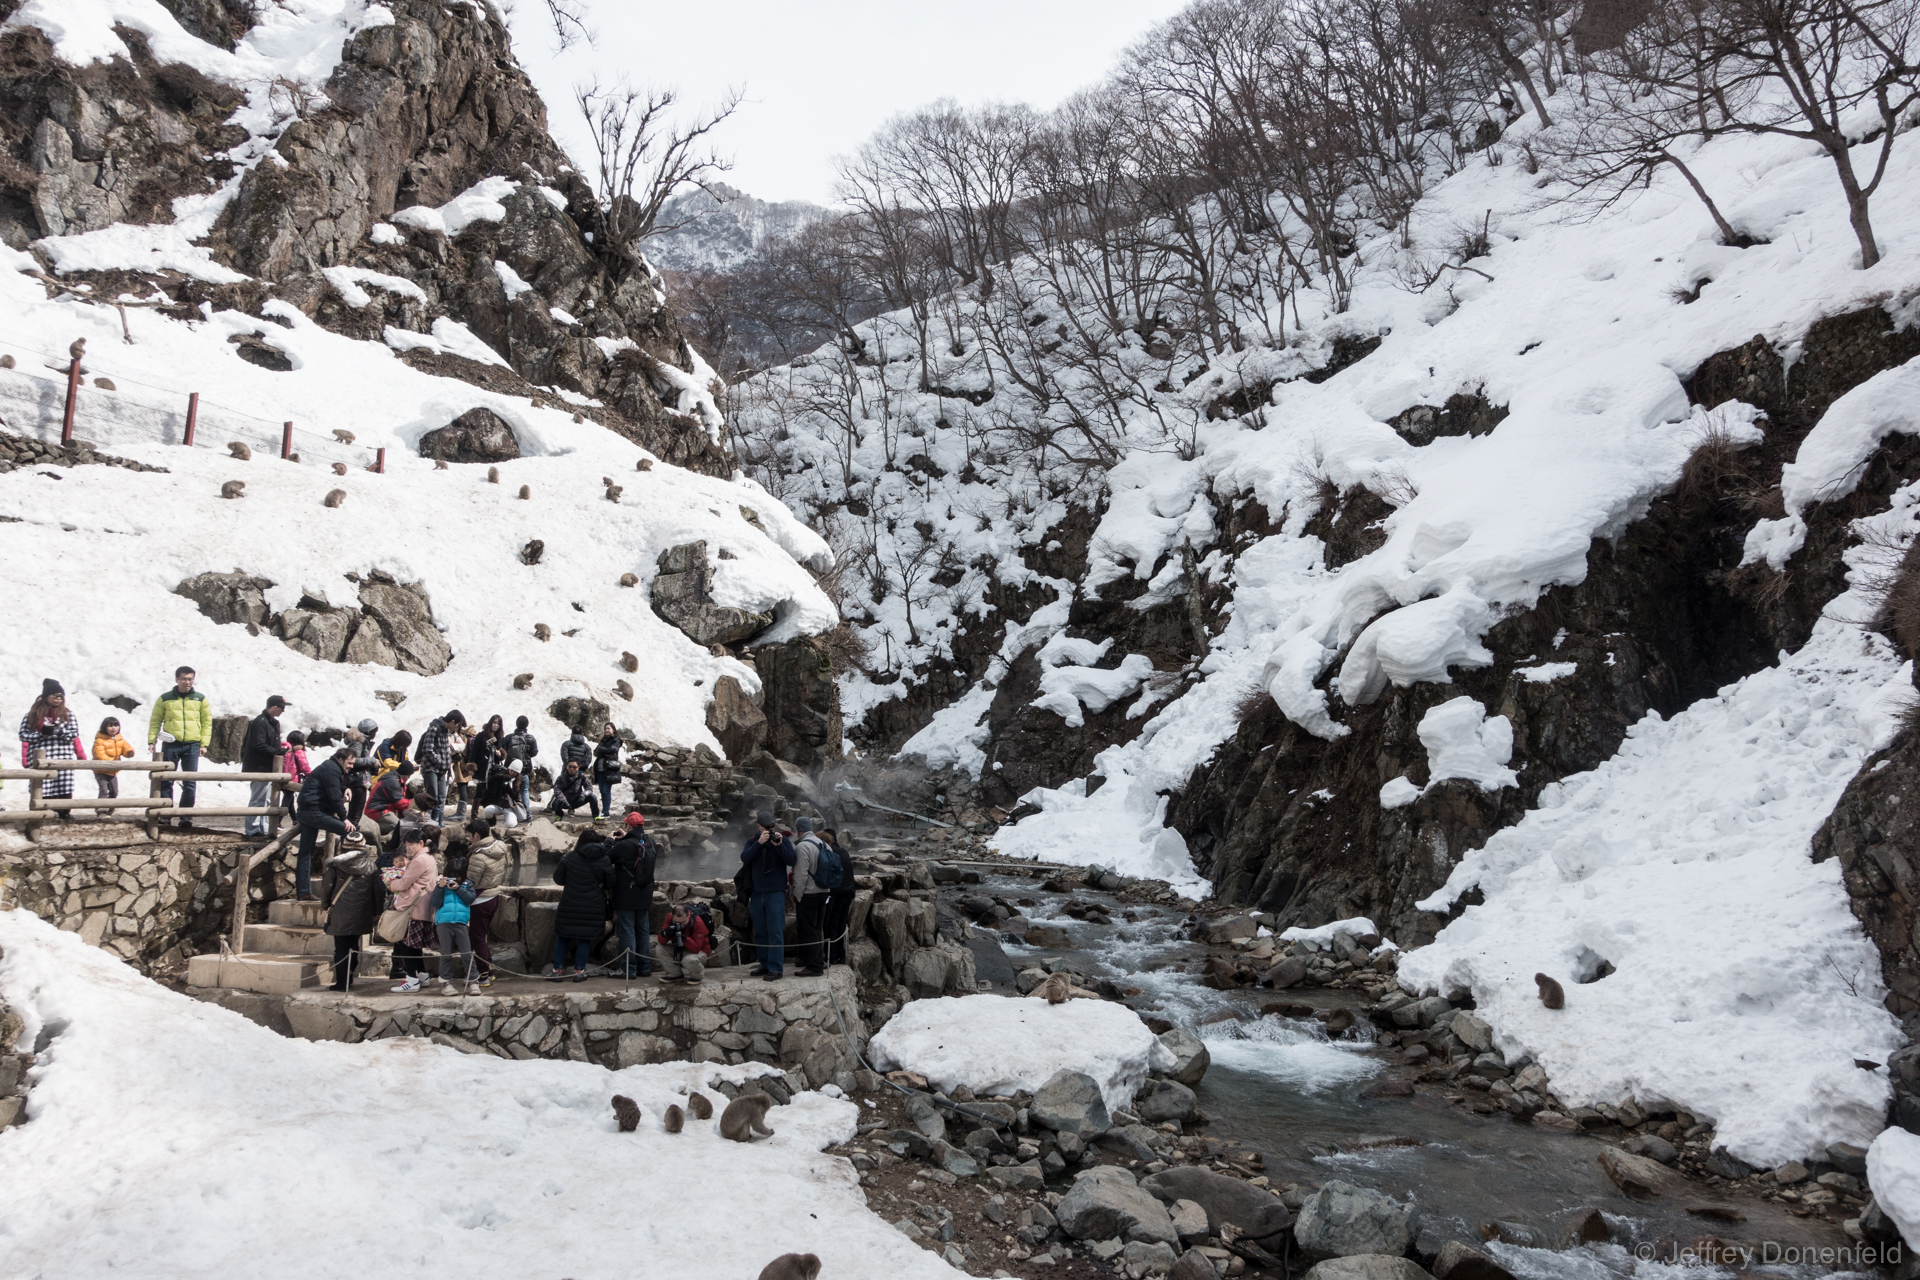 Snow Monkey Onsen is a popular tourist attraction, with hoardes of touritst taking photos. Despite this, the monkeys seems at ease, and walk amongst the people freely.